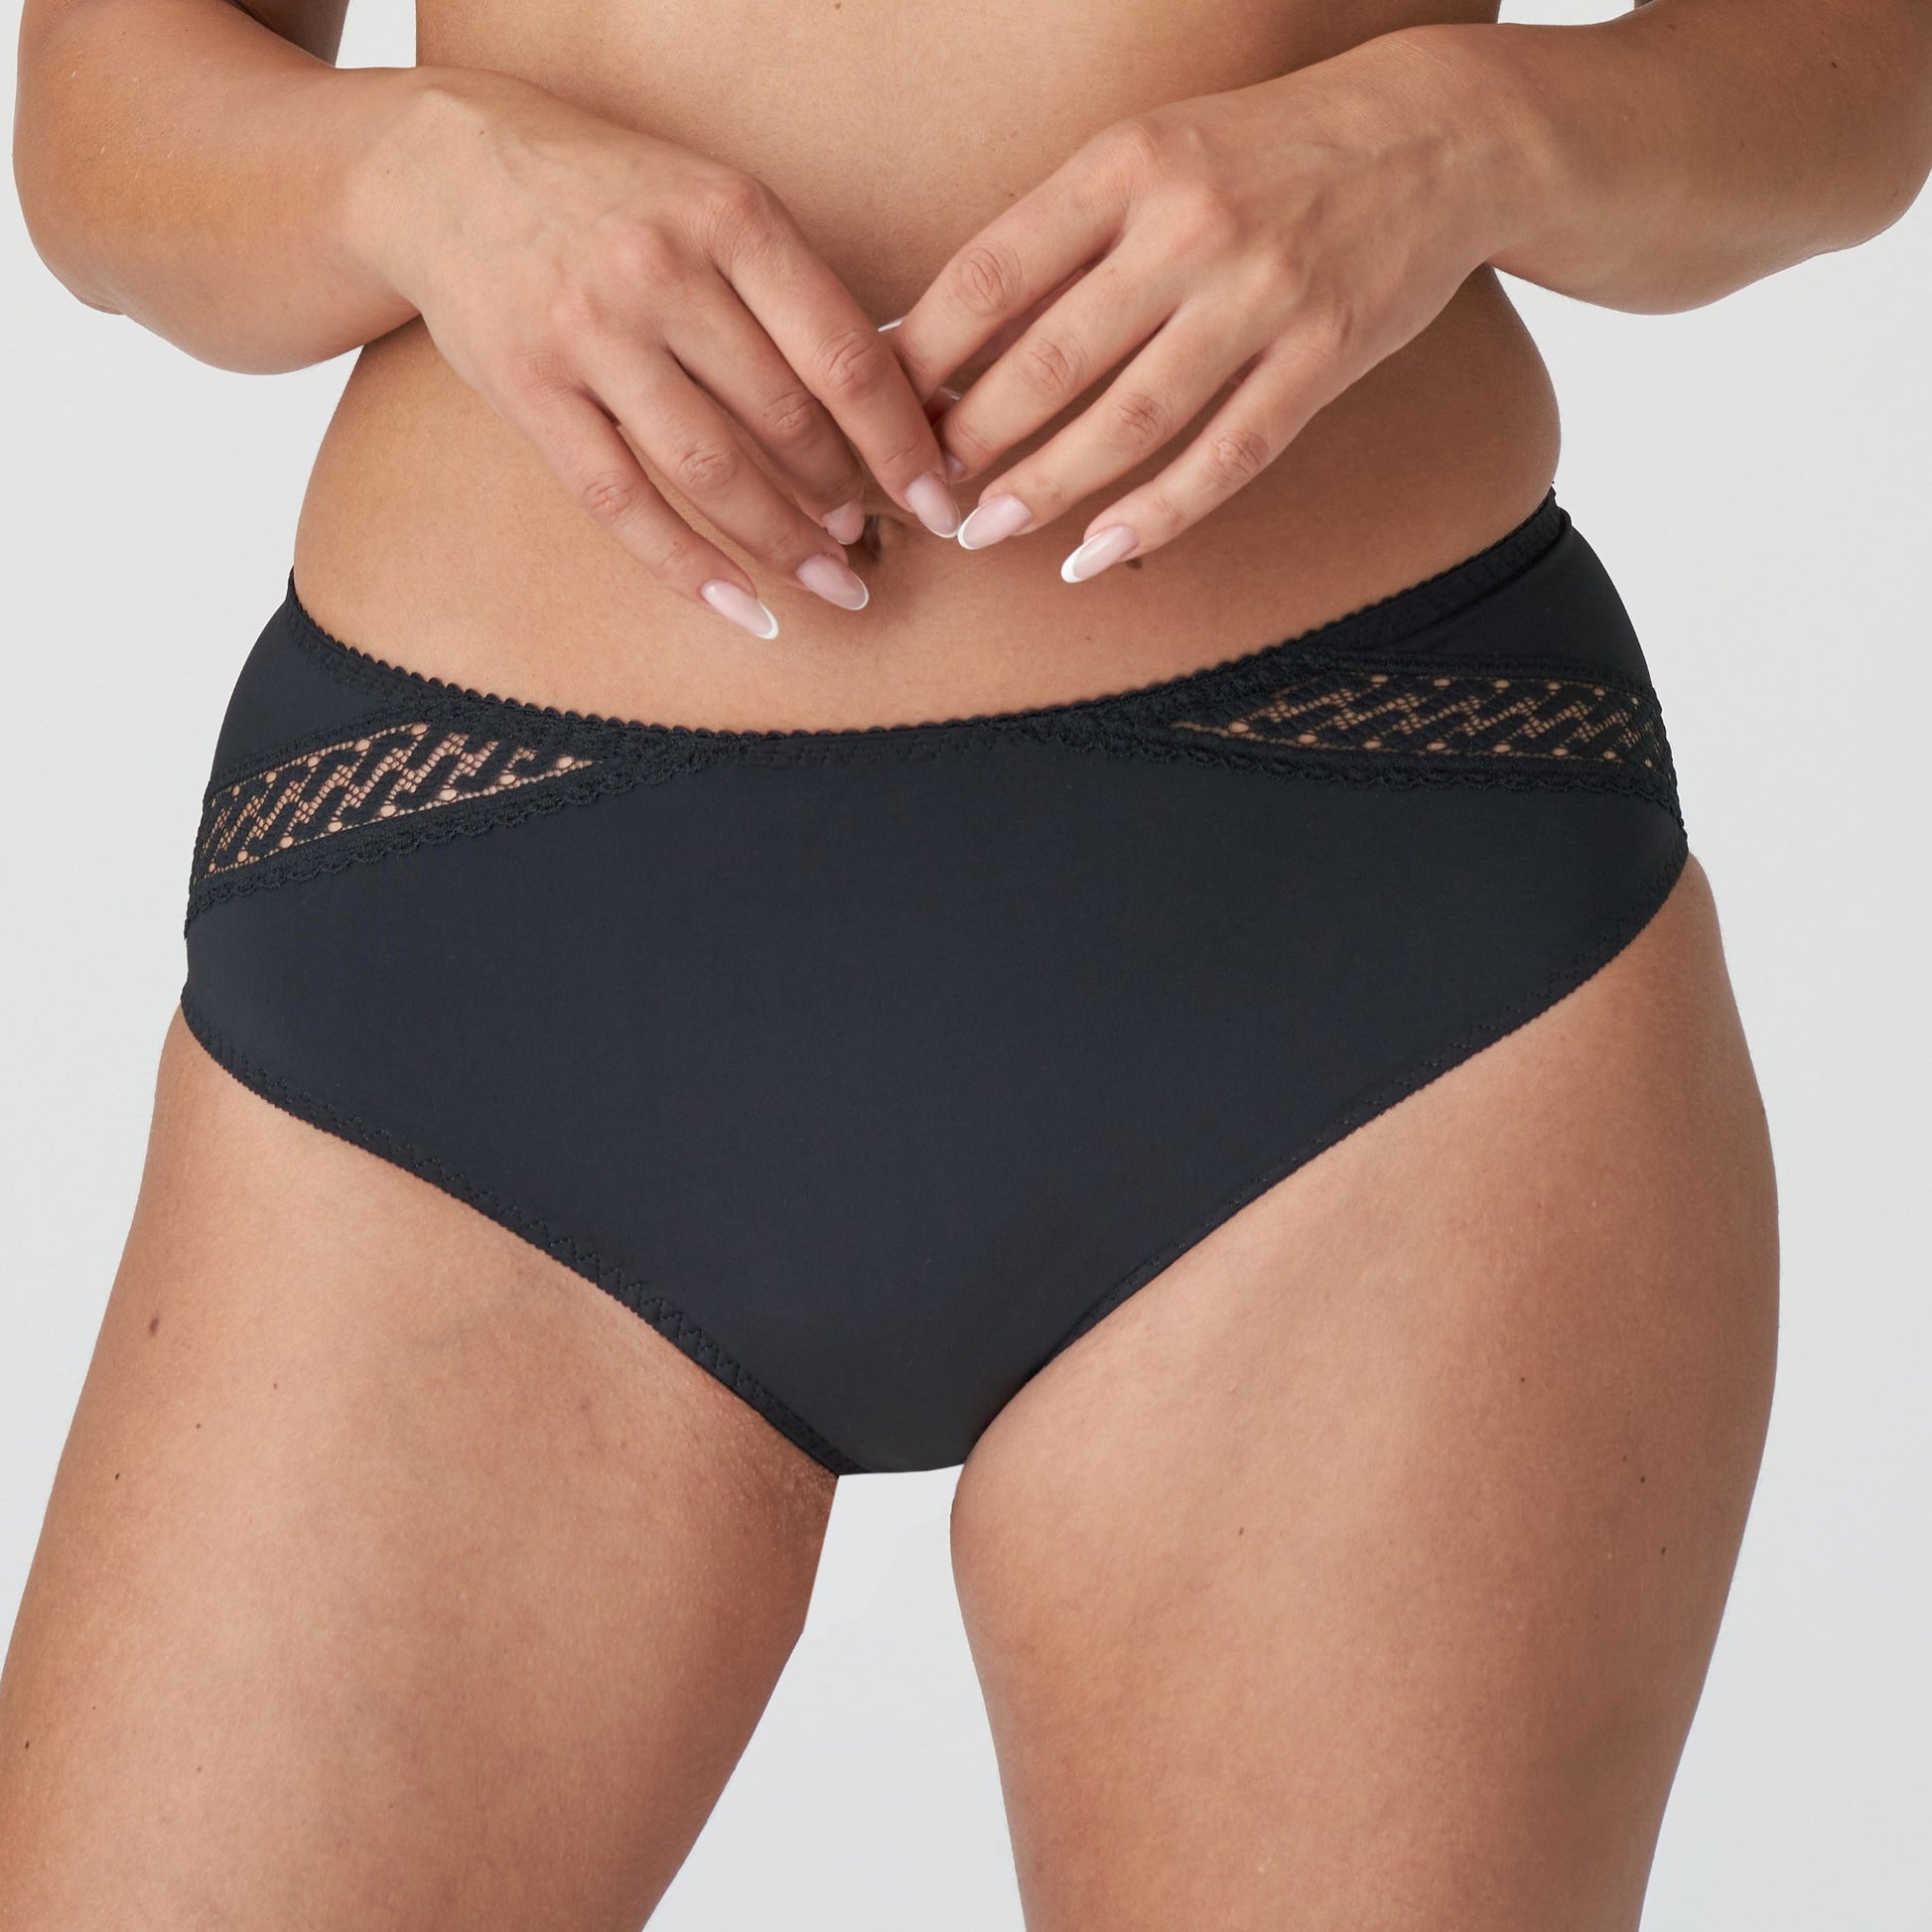 Front view of a woman wearing the Montara Full Brief panty in Black designed by PrimaDonna.